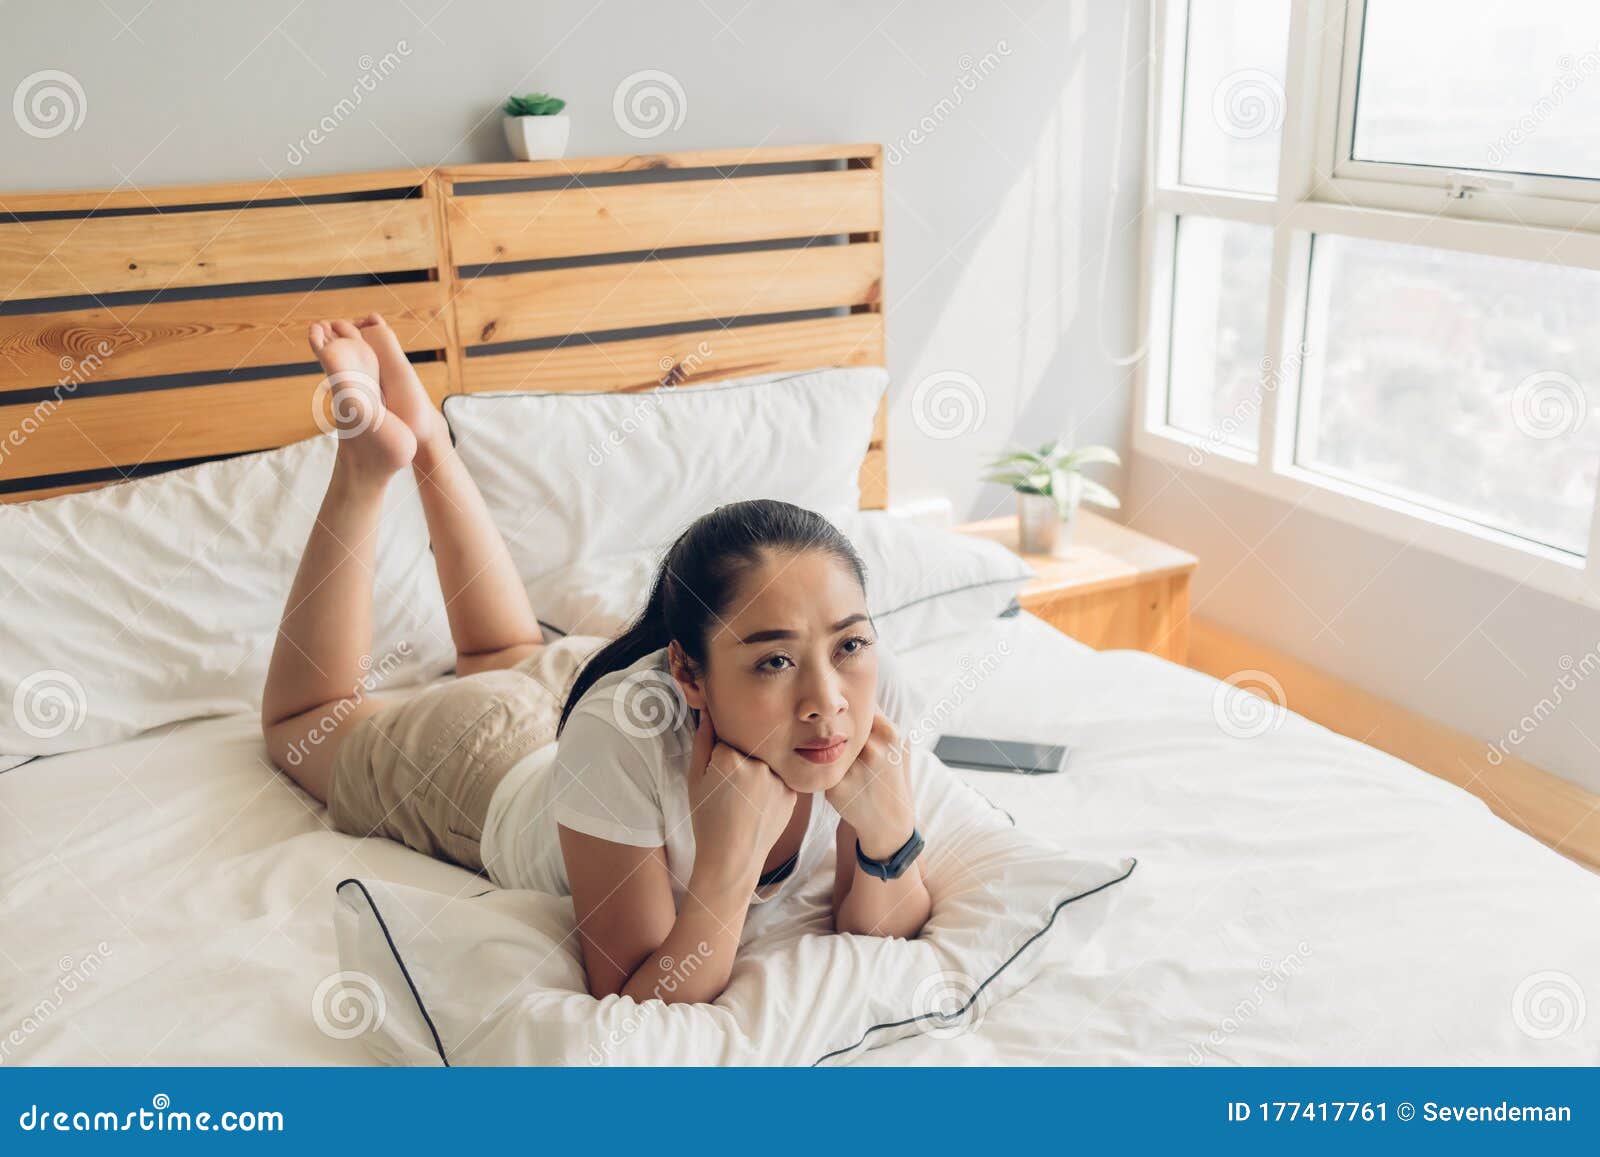 Woman Is Lying On Bed And Seriously Watching Drama Tv Series Stock